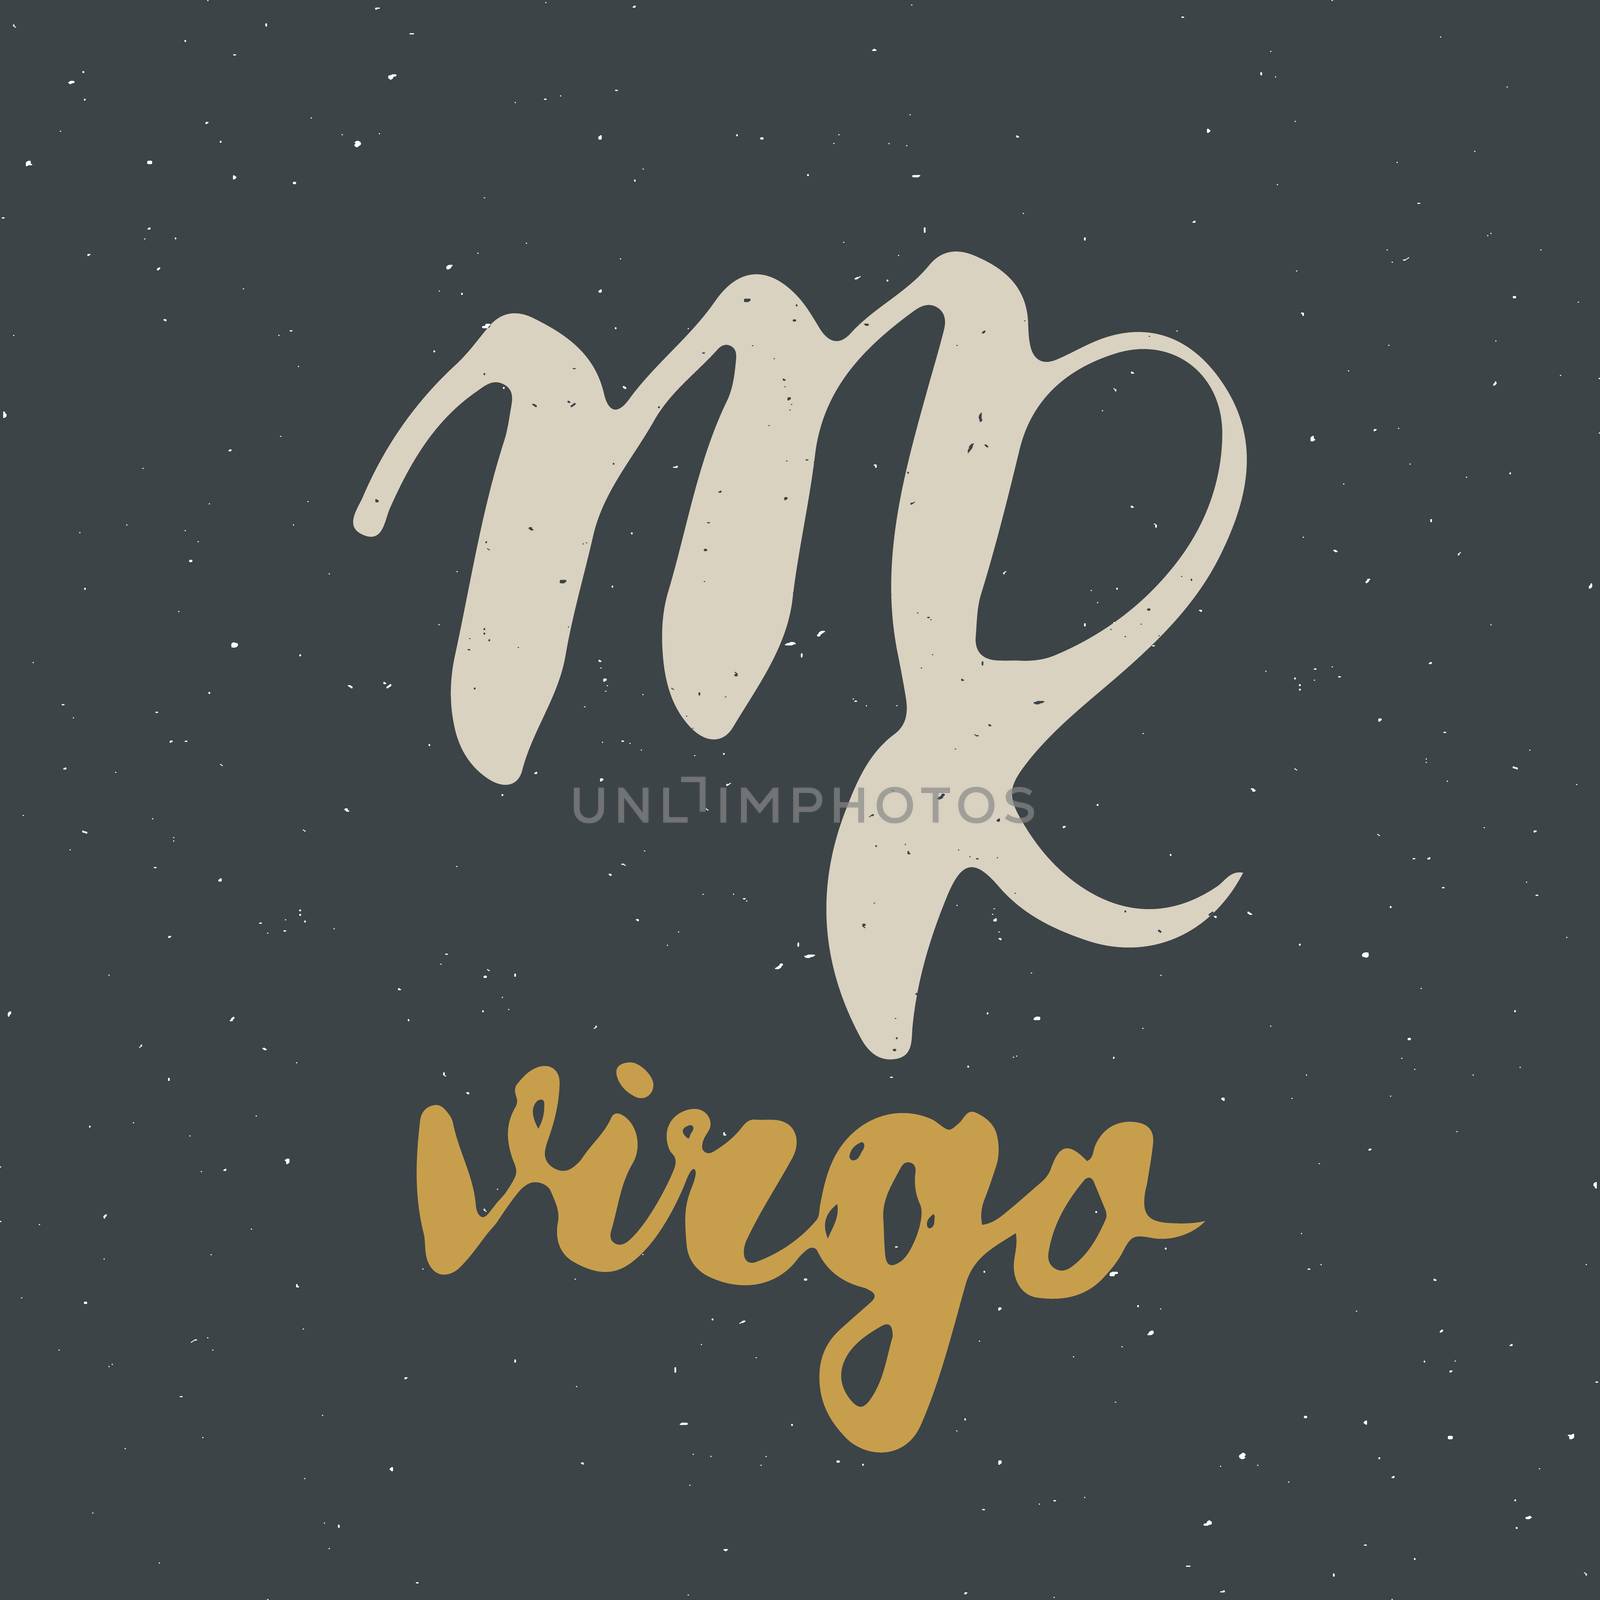 Zodiac sign Virgo and lettering. Hand drawn horoscope astrology symbol, grunge textured design, typography print, vector illustration .